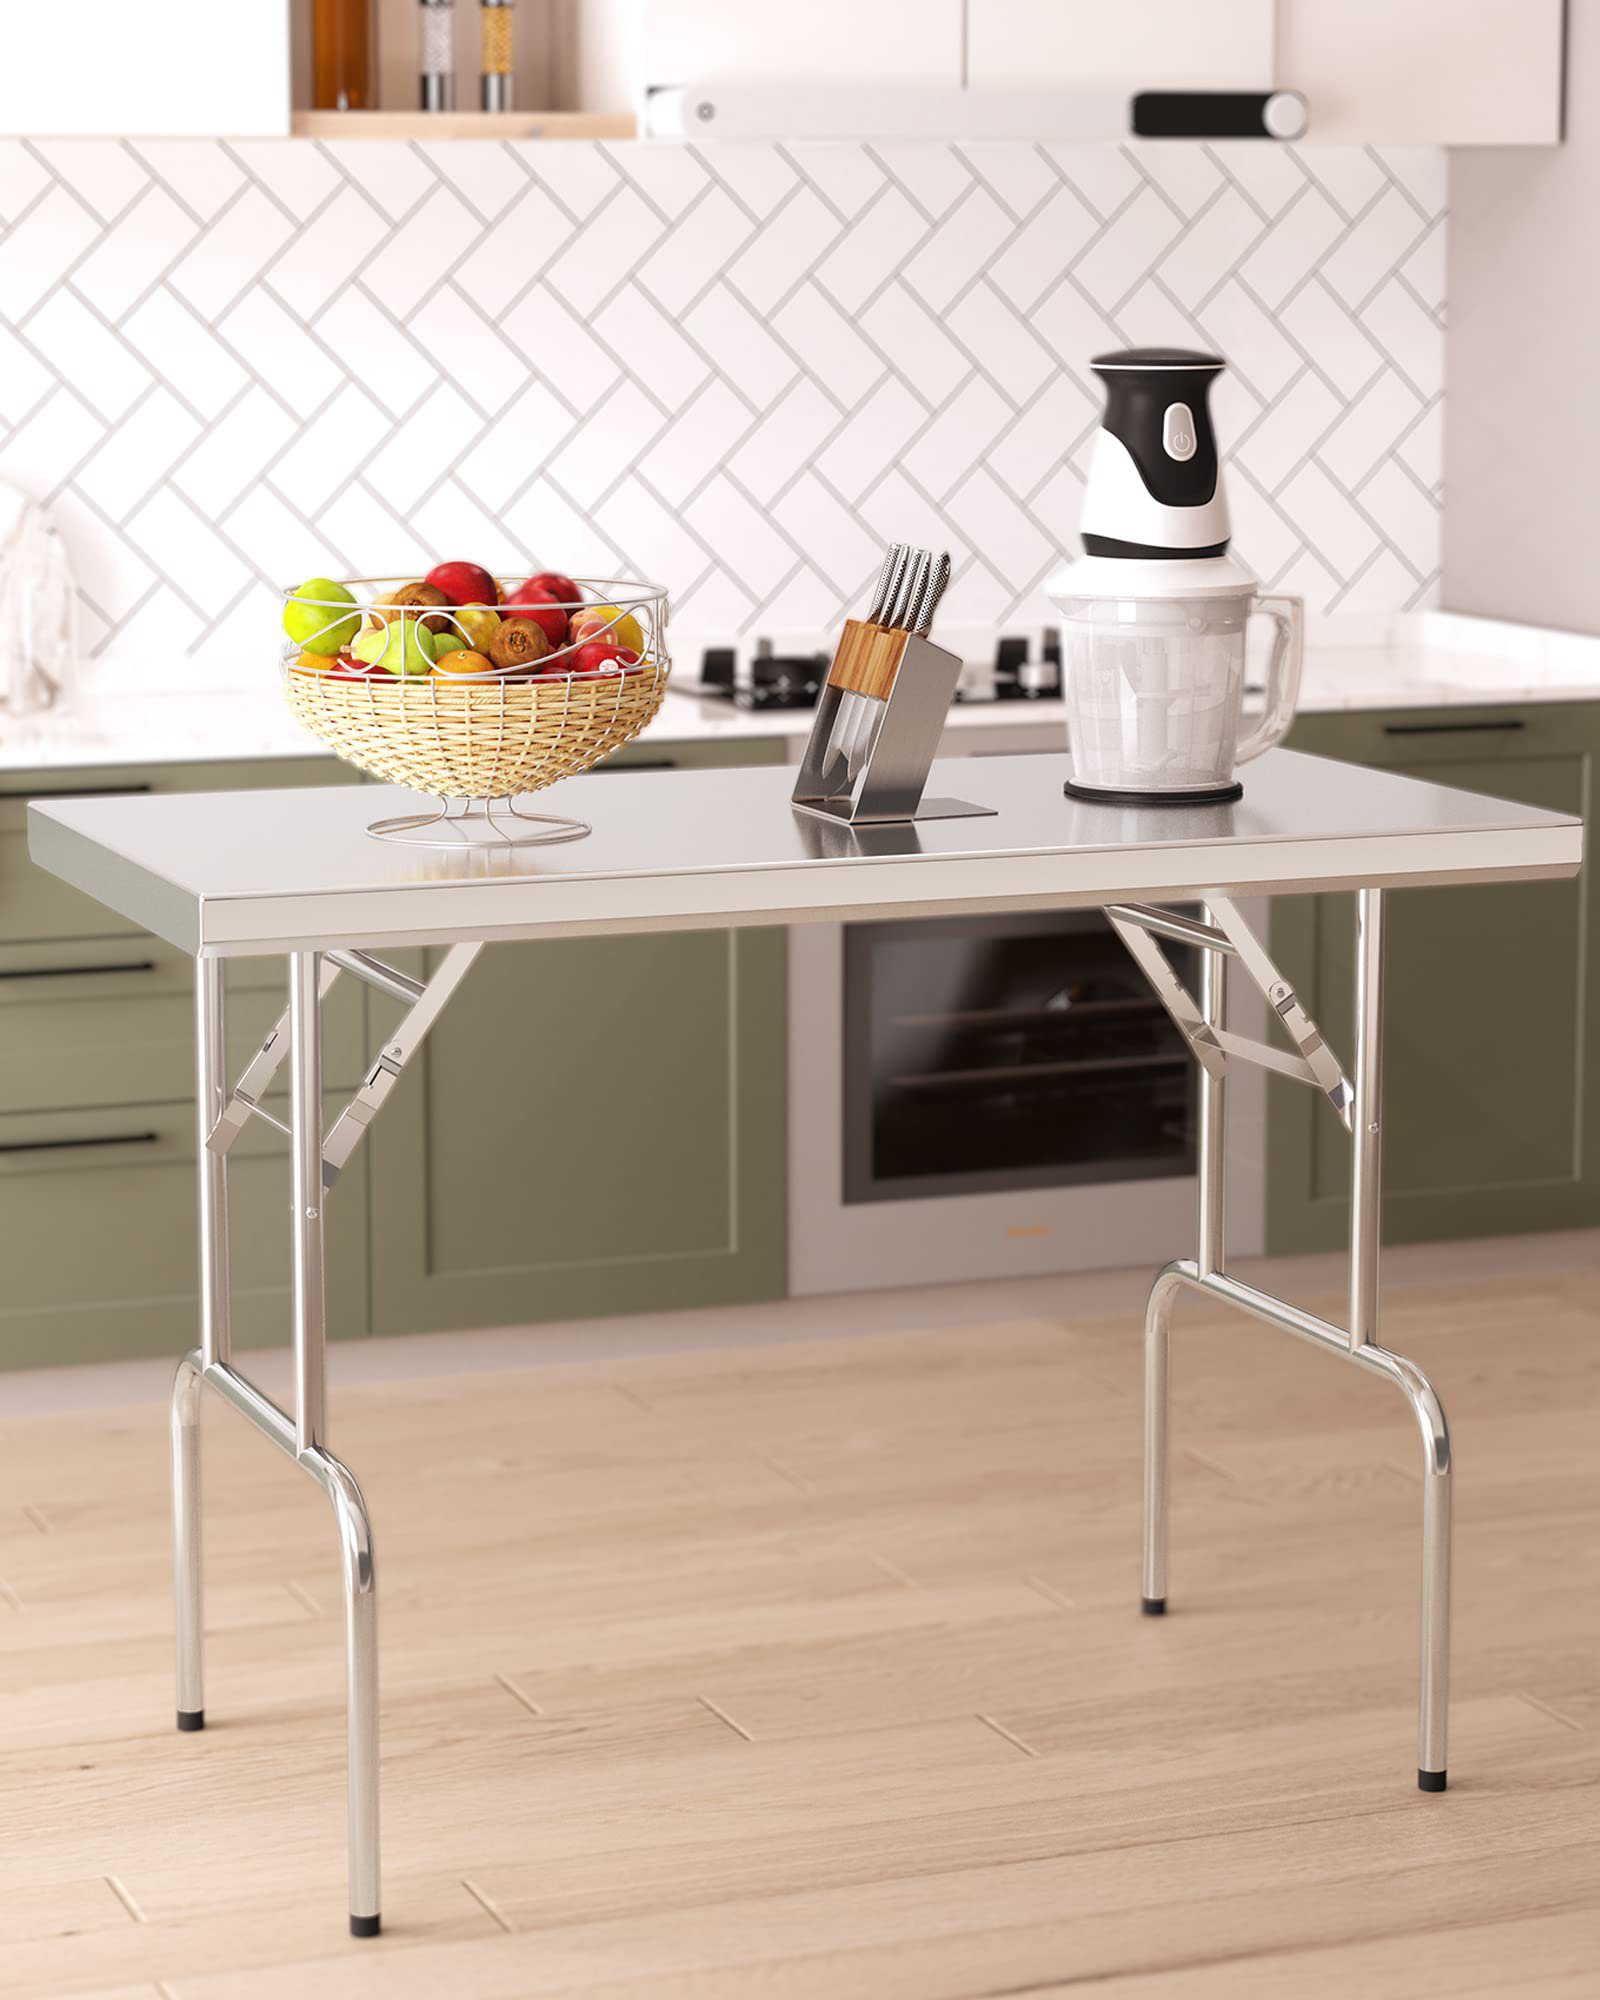 GRIDMANN 24 W x 30 L Stainless Steel Work Table with Undershelf and  Caster Wheels